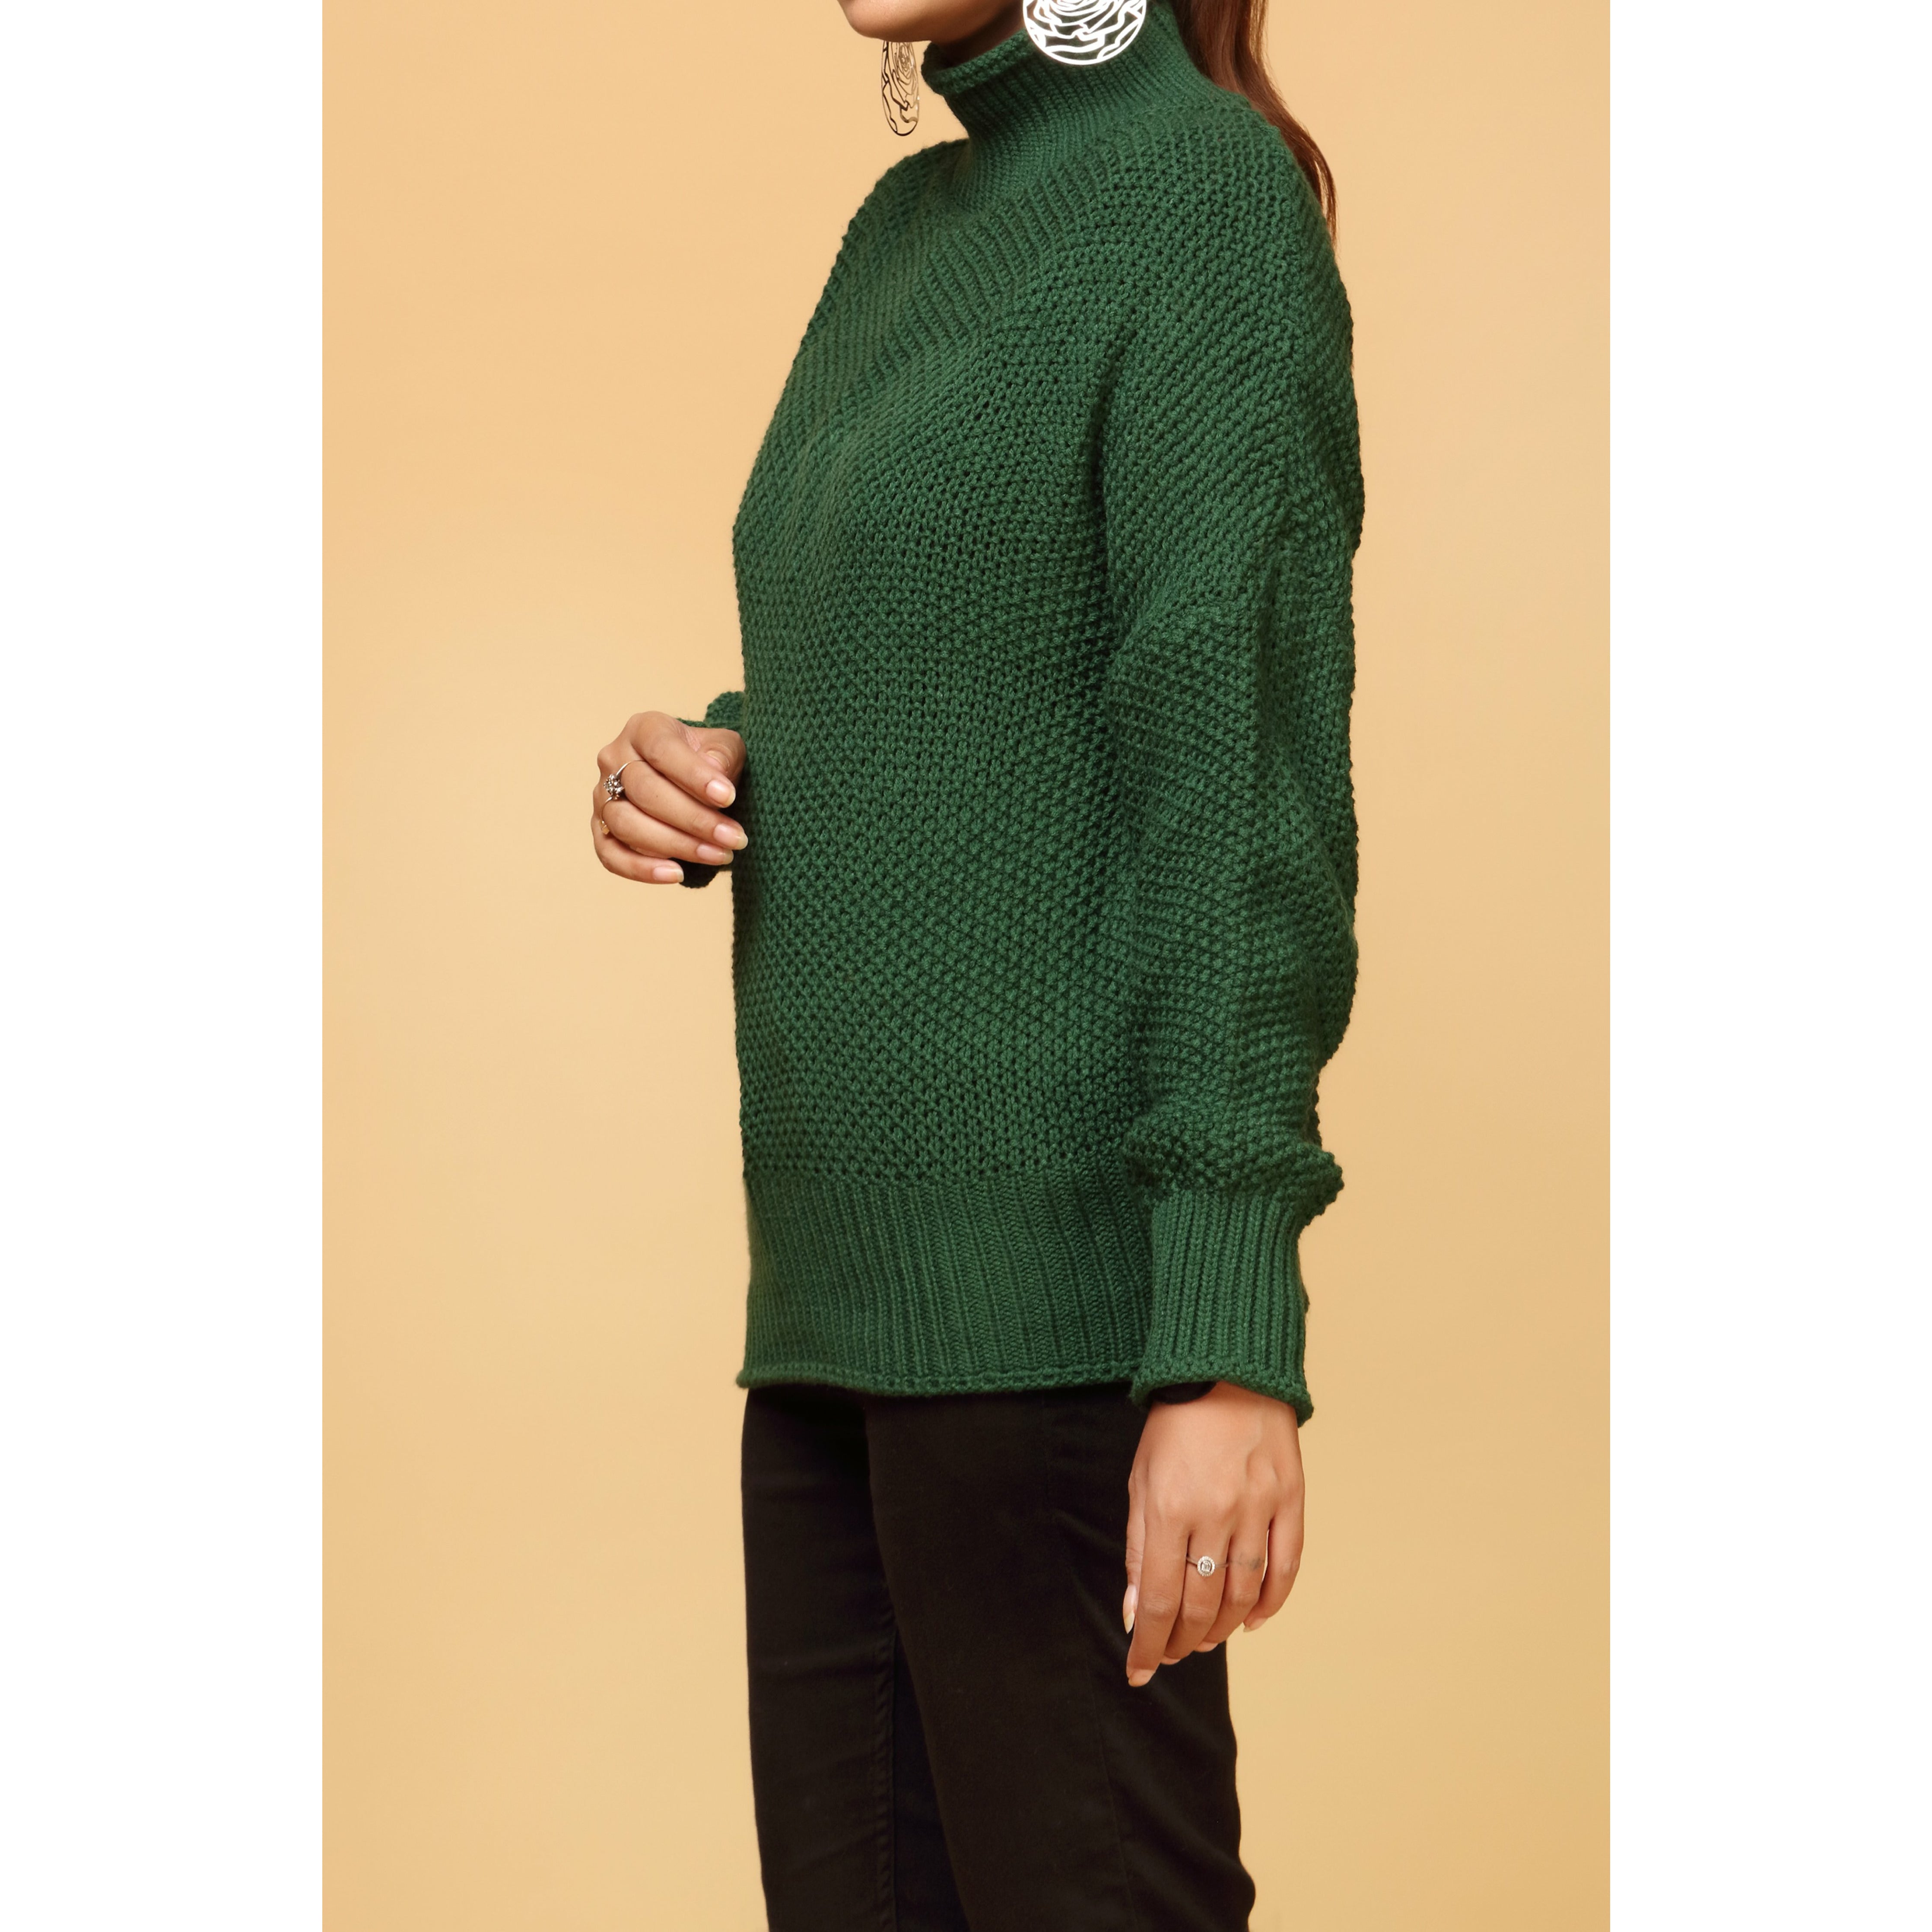 Green Color High Neck Sweater PW1905